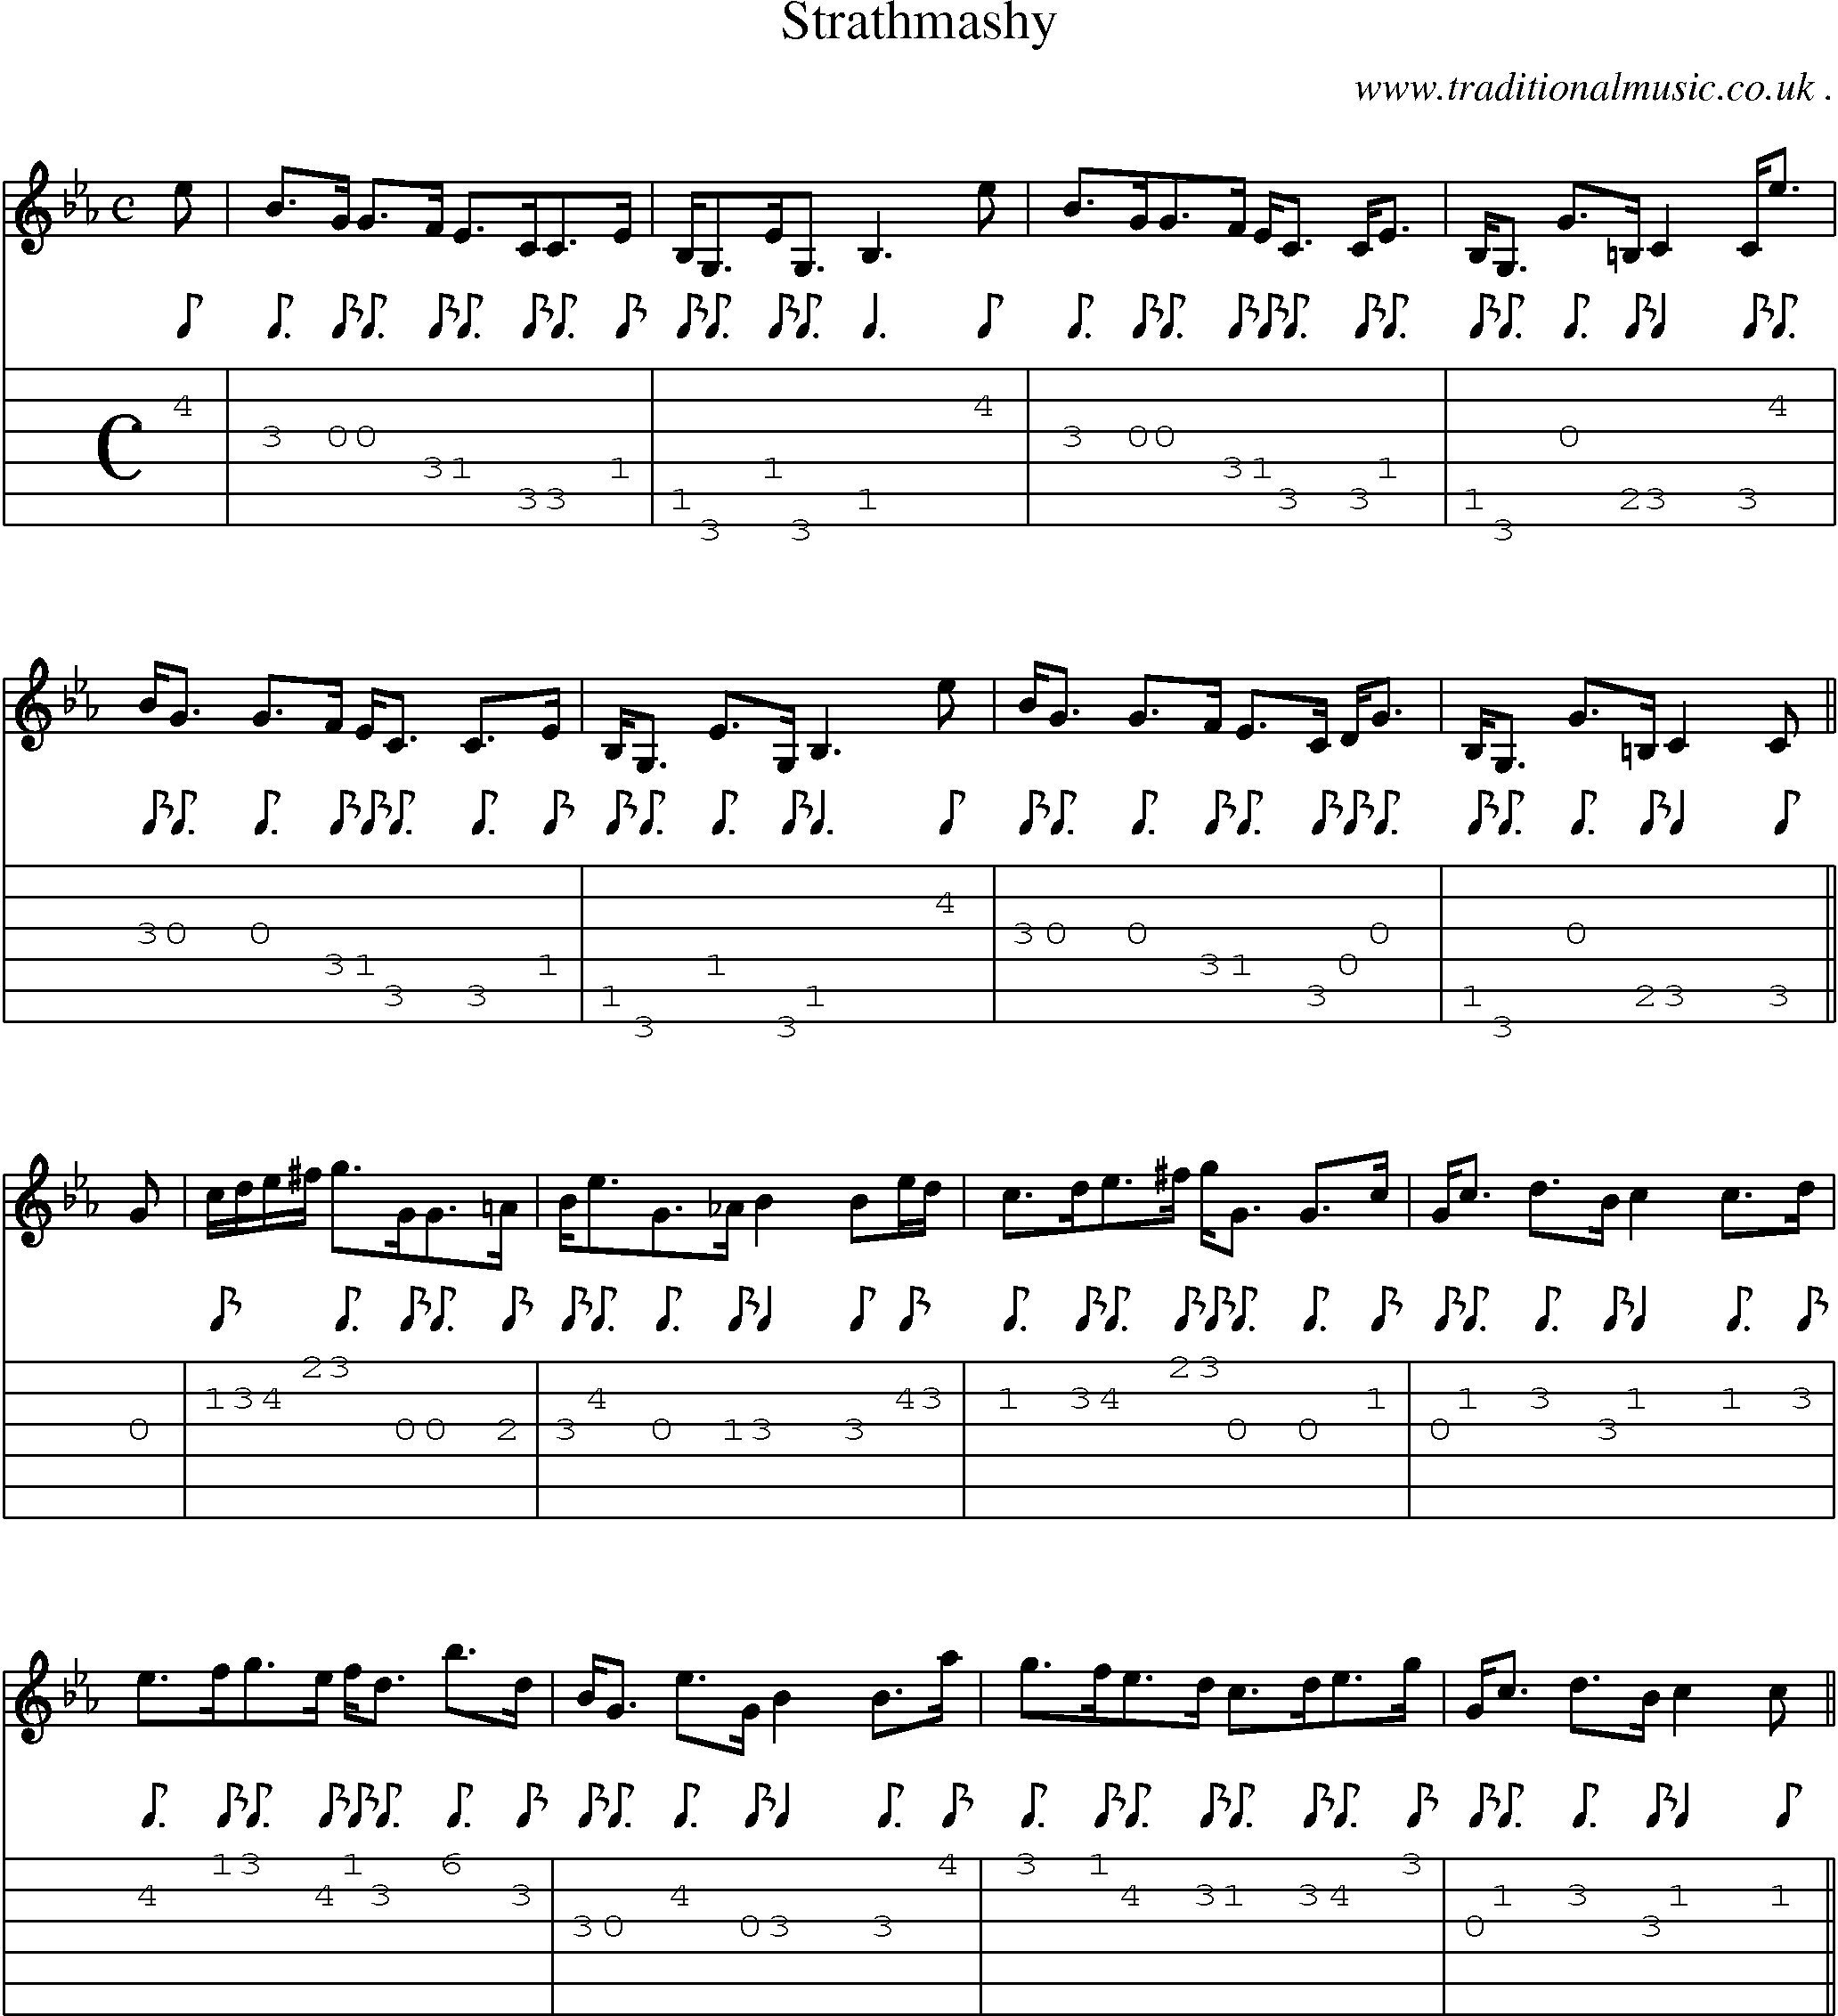 Sheet-music  score, Chords and Guitar Tabs for Strathmashy